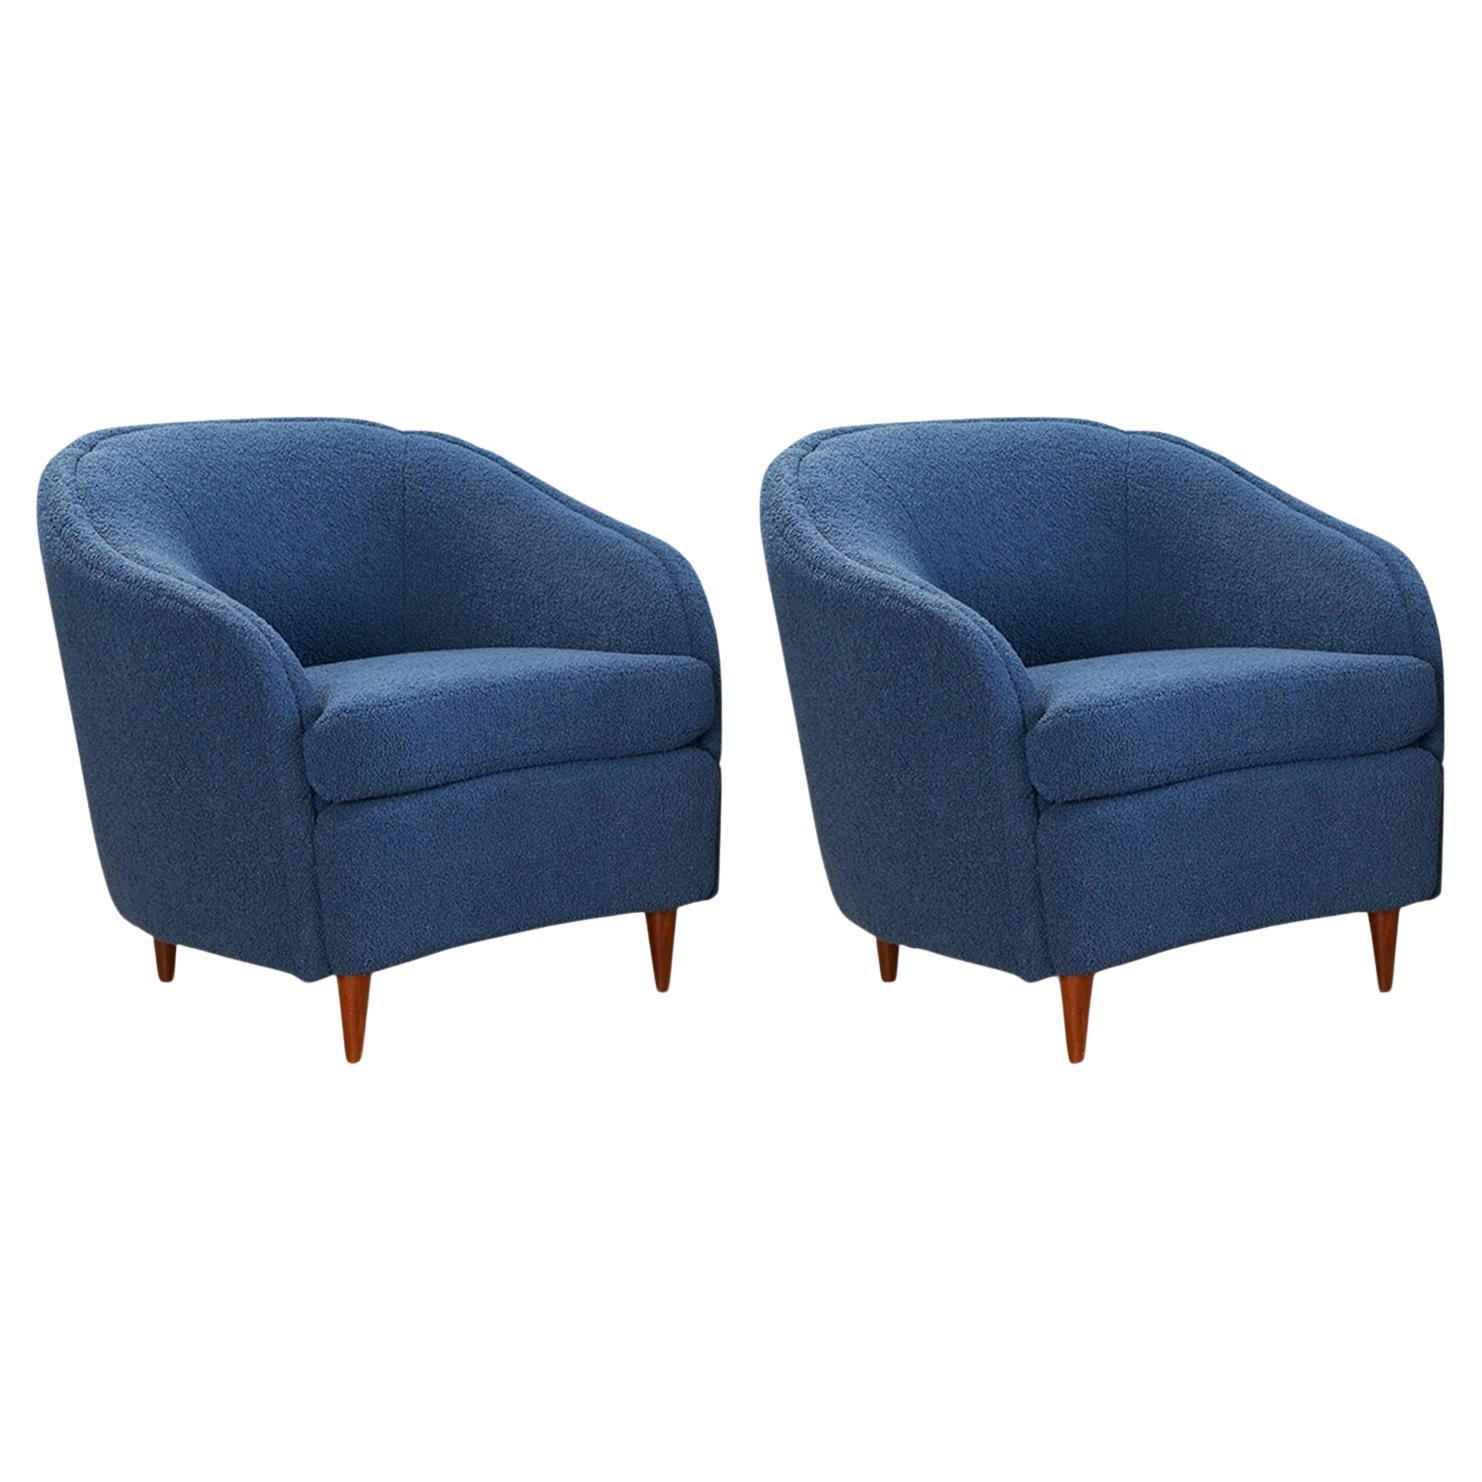 Mid Century Italian Lounge Chairs in Blue Boucle, a Pair For Sale